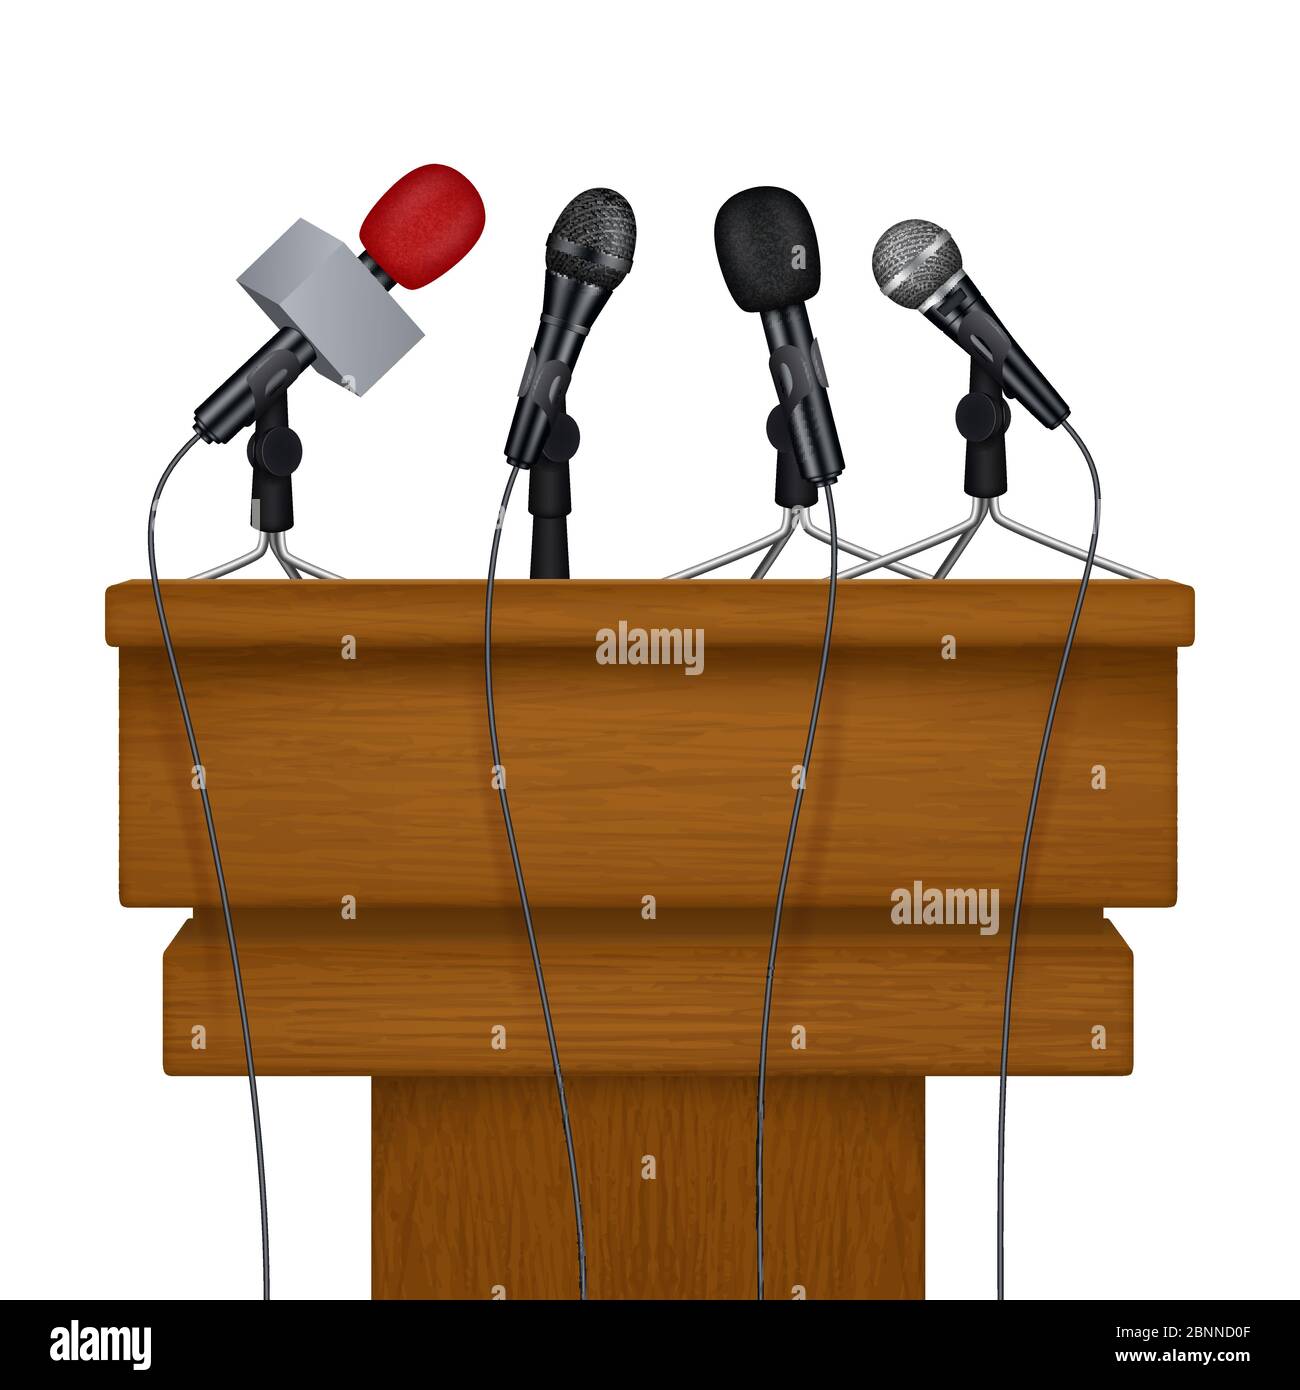 Press conference stage. Meeting news media microphones vector